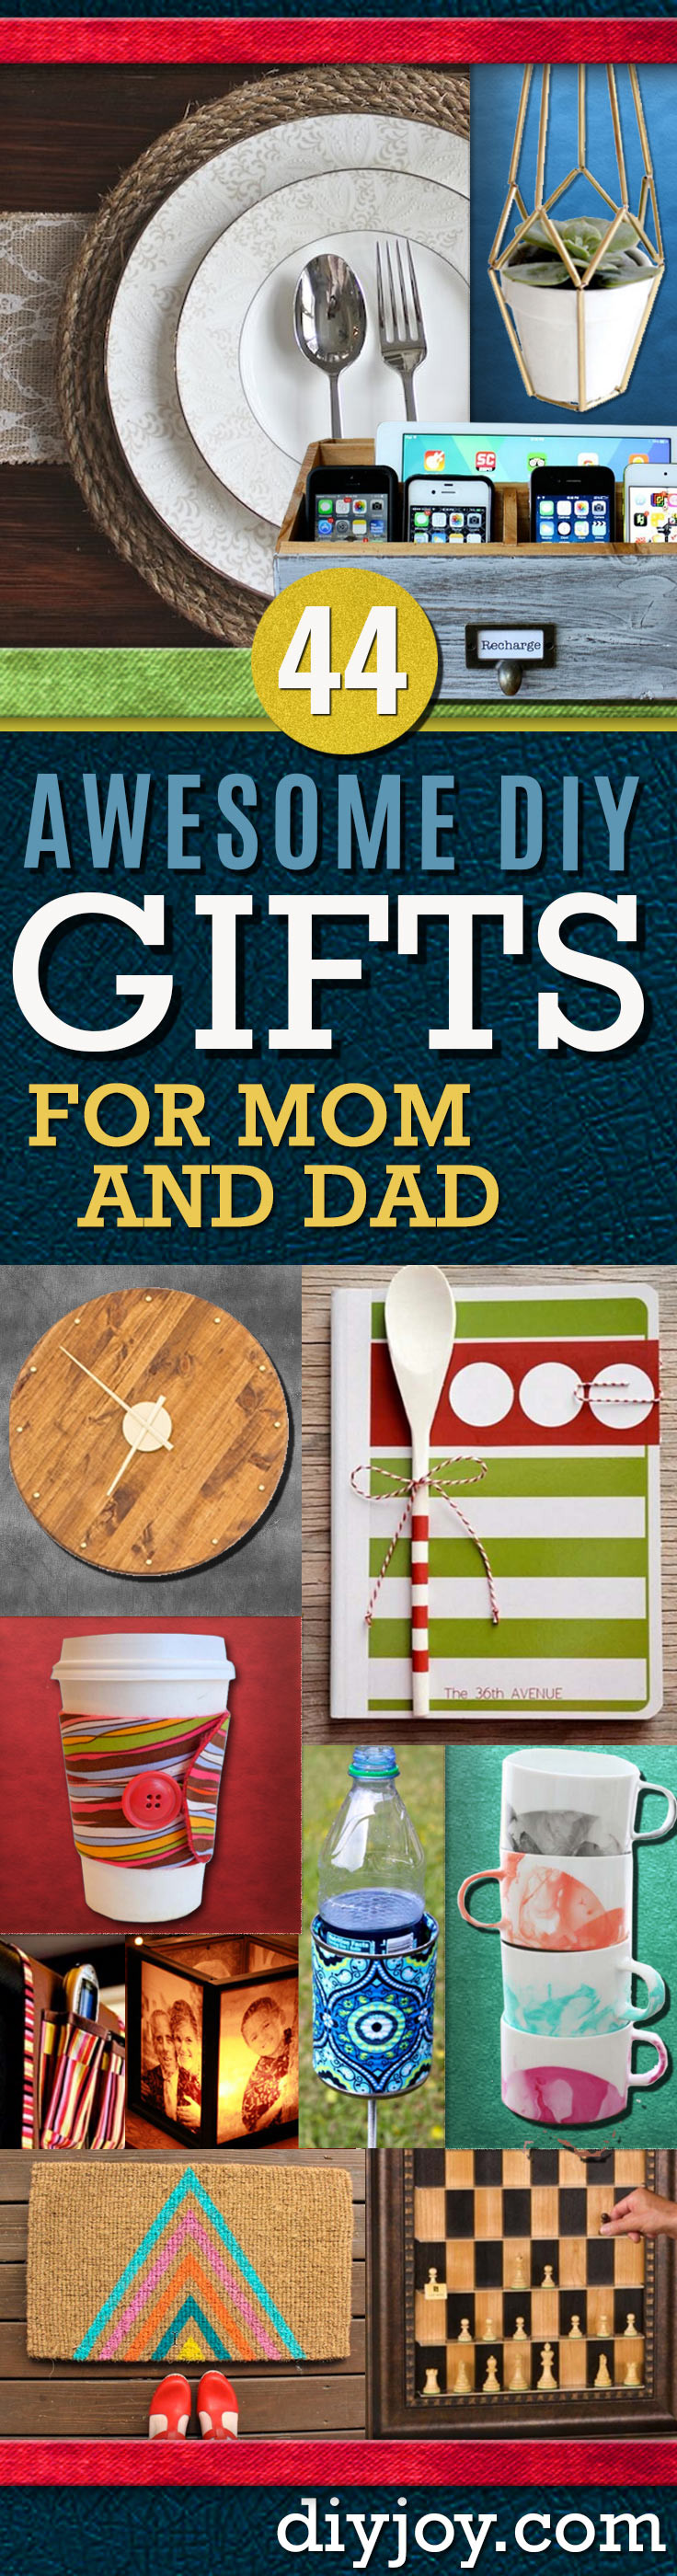 DIY Christmas Gift For Parents
 Awesome DIY Gift Ideas Mom and Dad Will Love